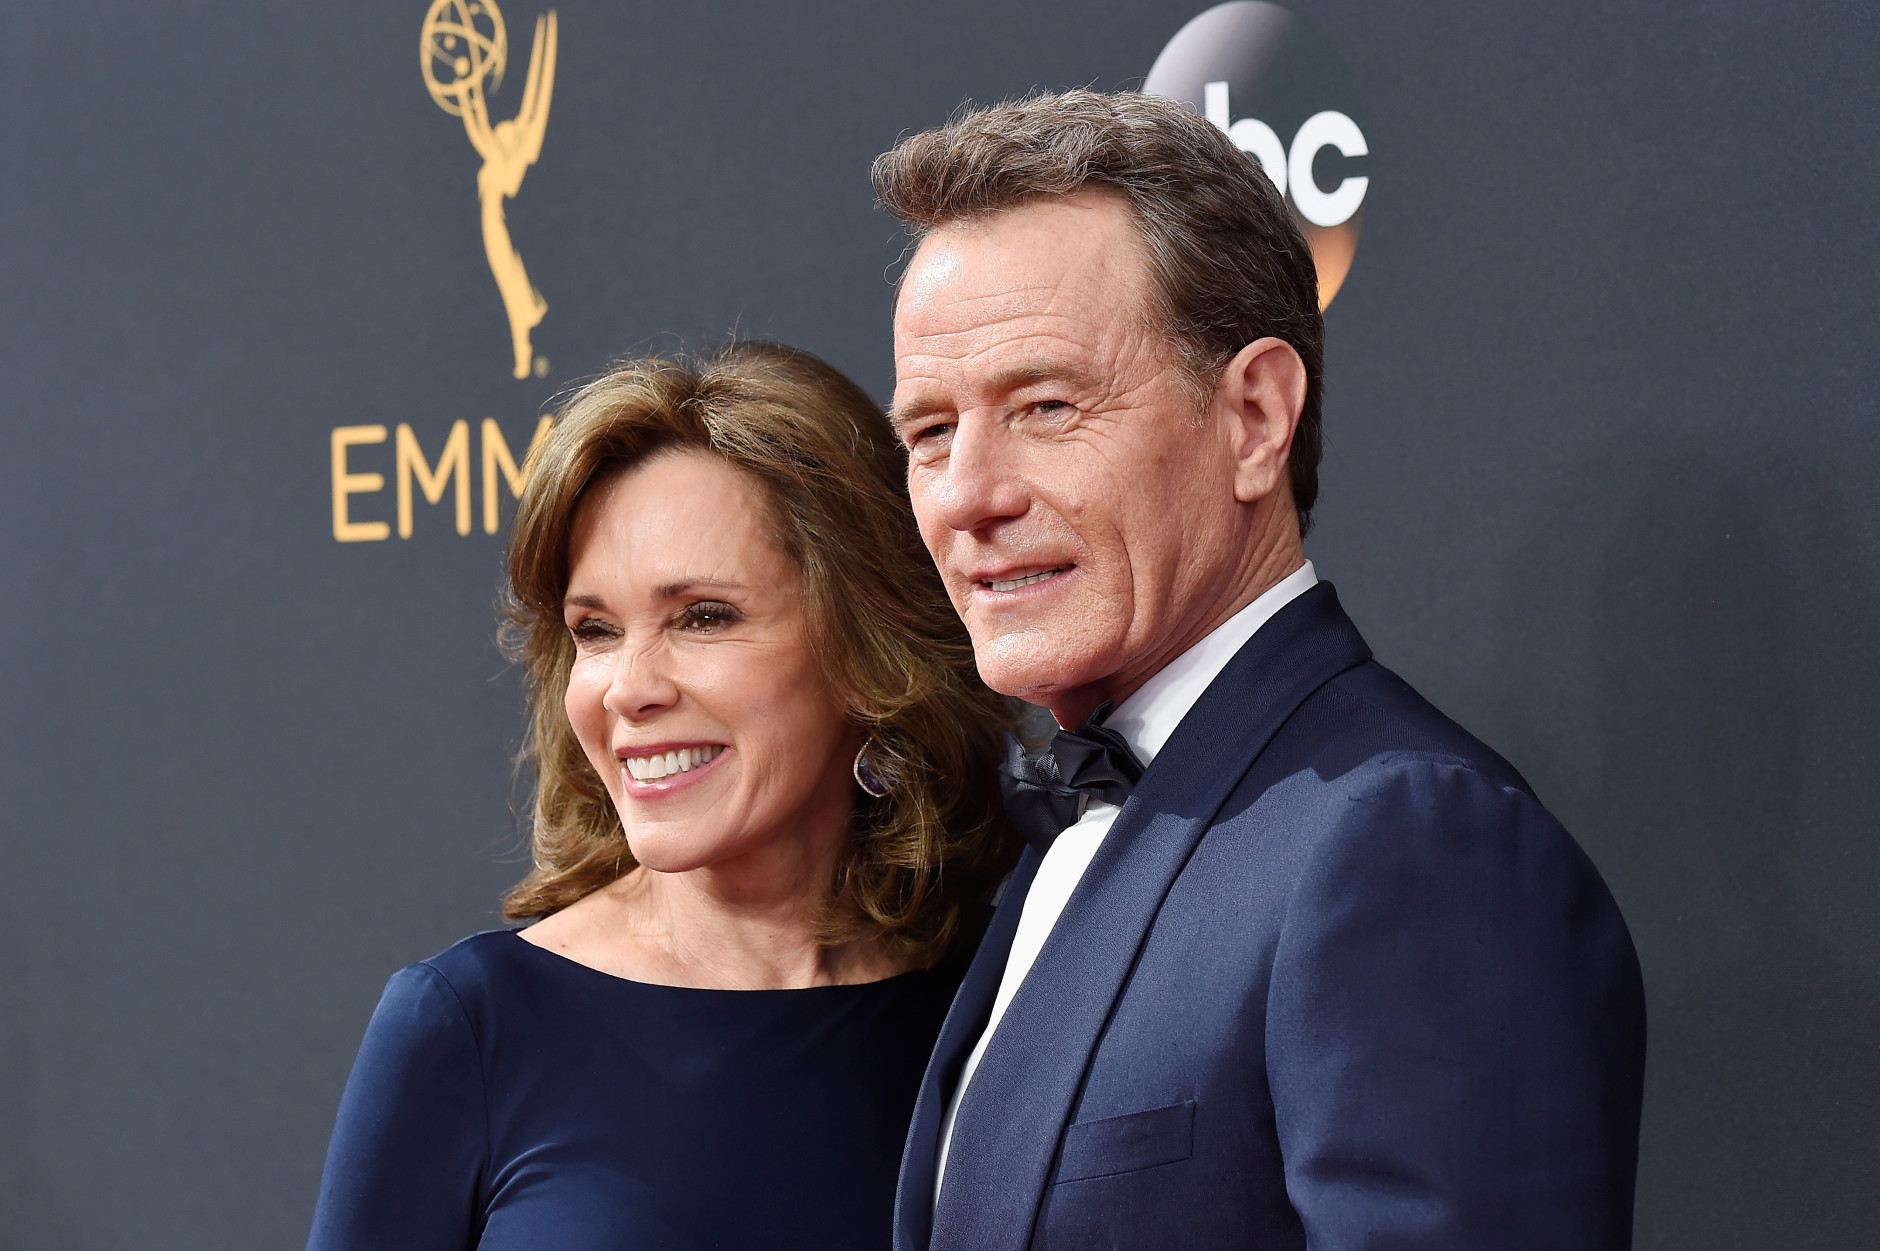 LOS ANGELES, CA - SEPTEMBER 18:  Actor Bryan Cranston (R) and Robin Dearden attend the 68th Annual Primetime Emmy Awards at Microsoft Theater on September 18, 2016 in Los Angeles, California.  (Photo by Frazer Harrison/Getty Images)